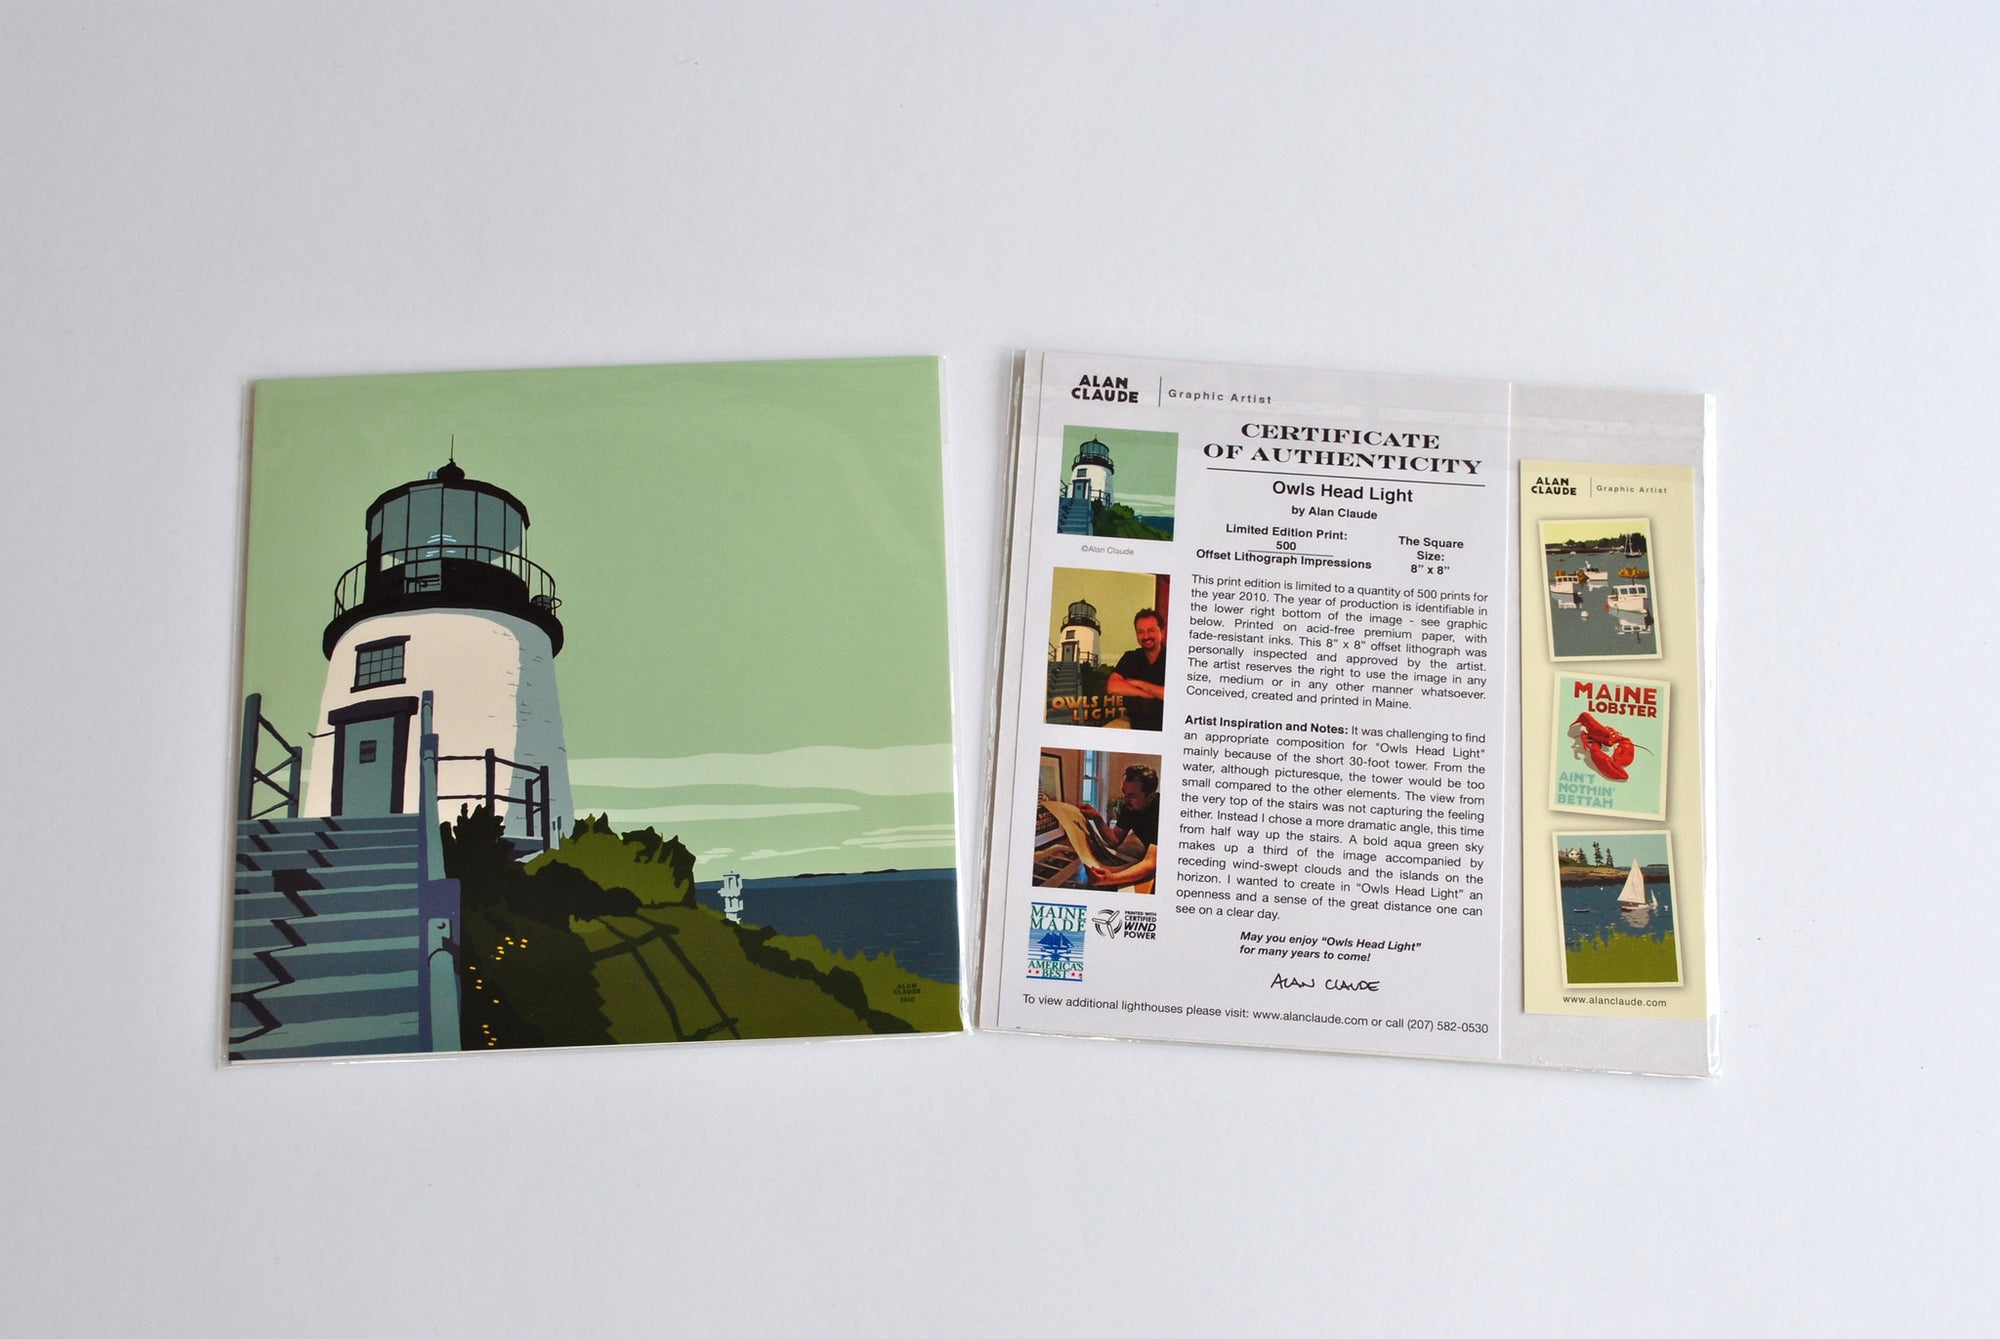 Owls Head Light Art Print 8" x 8" Square Wall Poster By Alan Claude - Maine